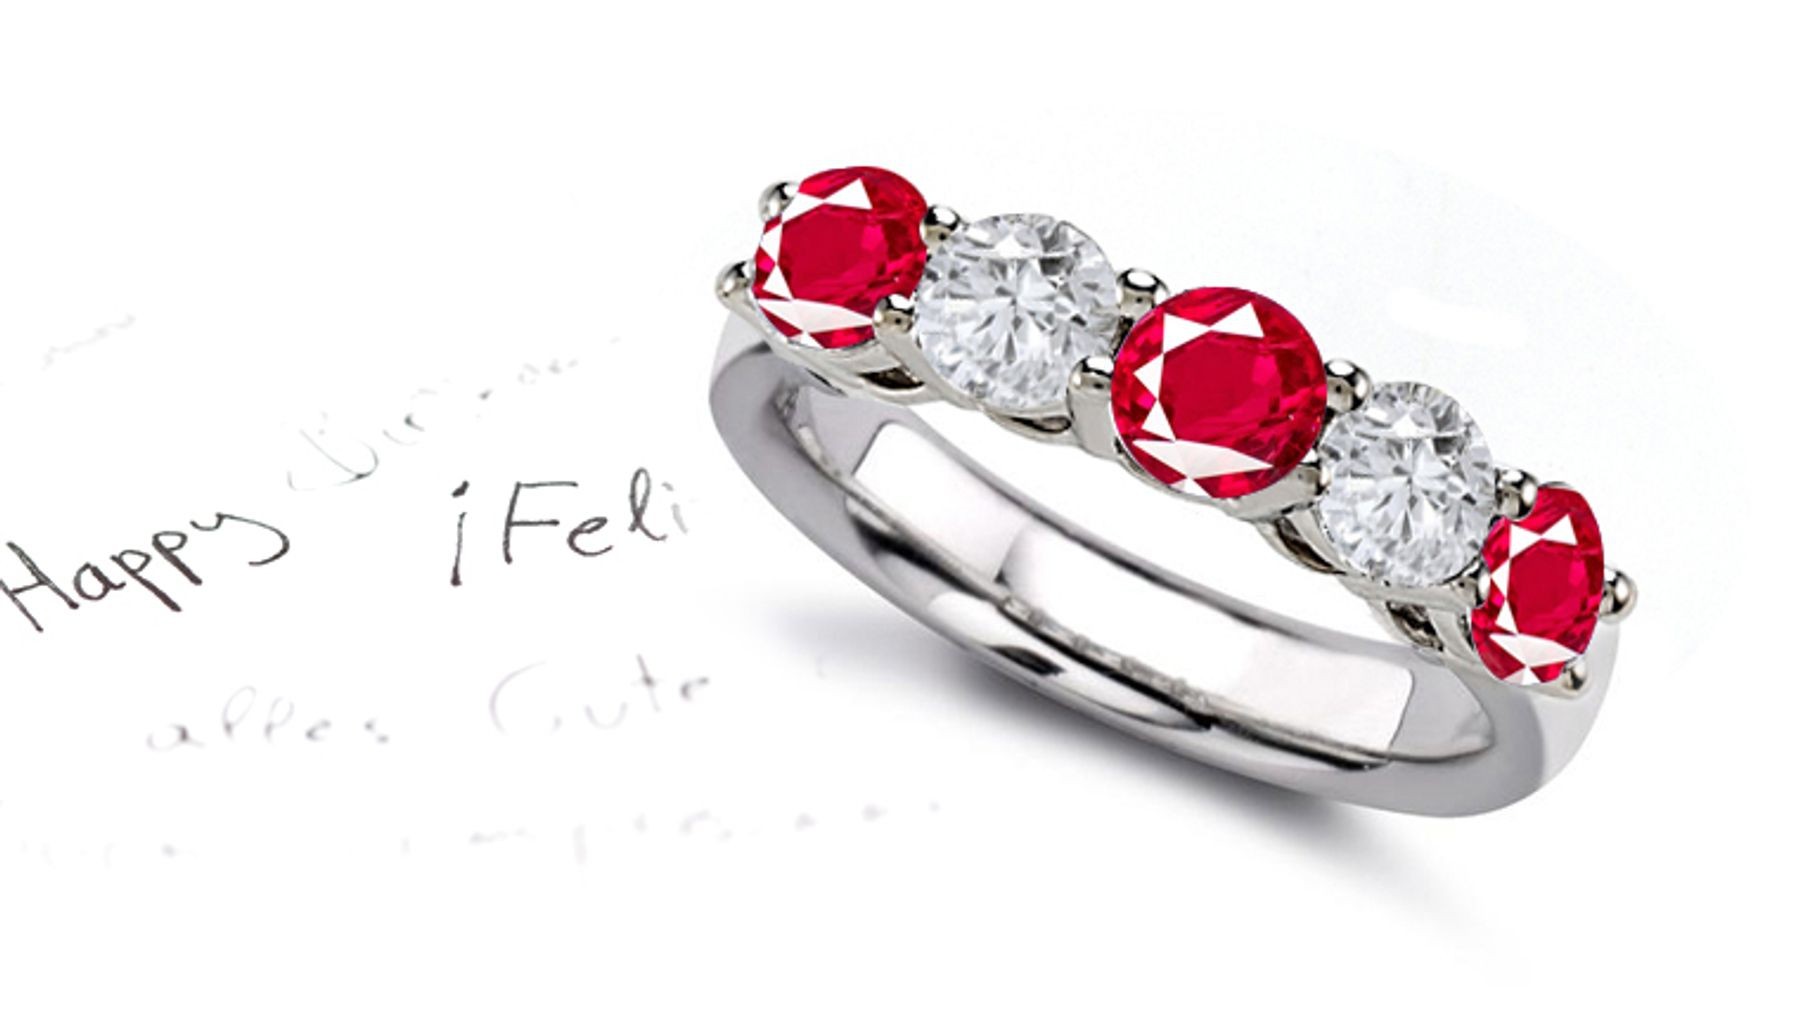 Ruby Five Stone Rings: Ruby diamond ring in platinum set with three round rubies and two round diamonds